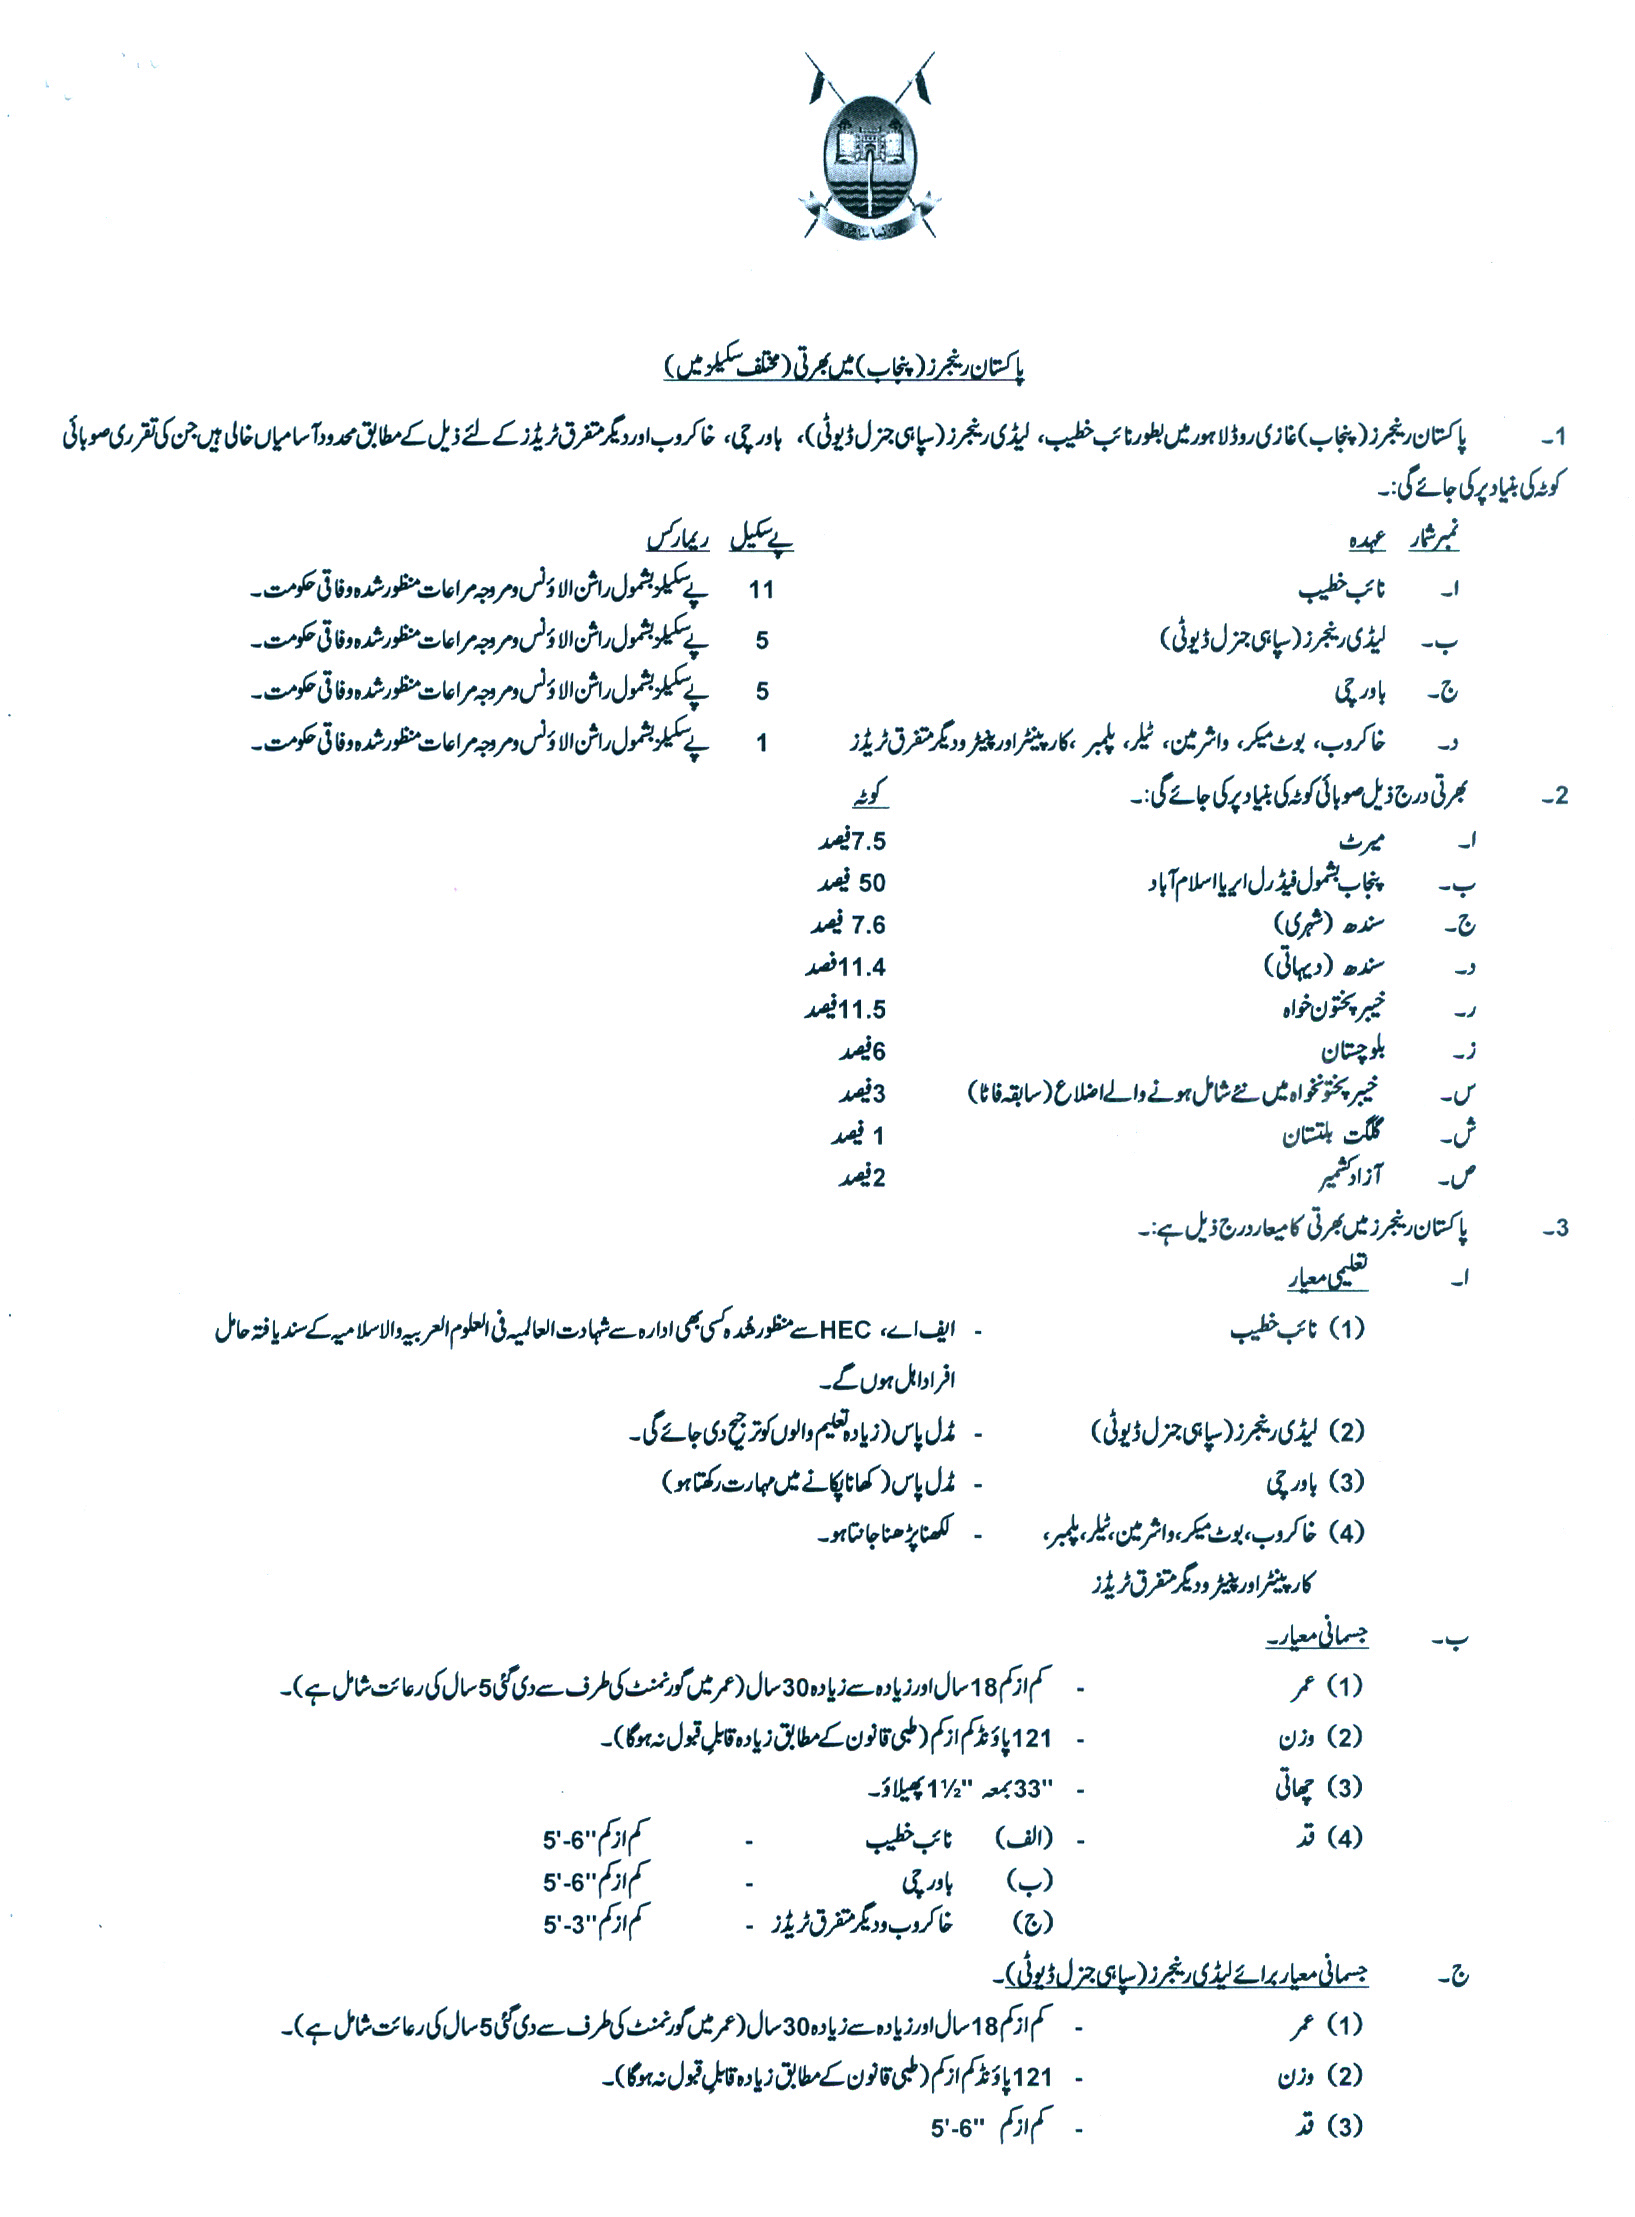 Punjab Rangers Jobs 2022 announcement for GD Sipahi Lady Rangers, Naib Khateeb, Cook Skilled and